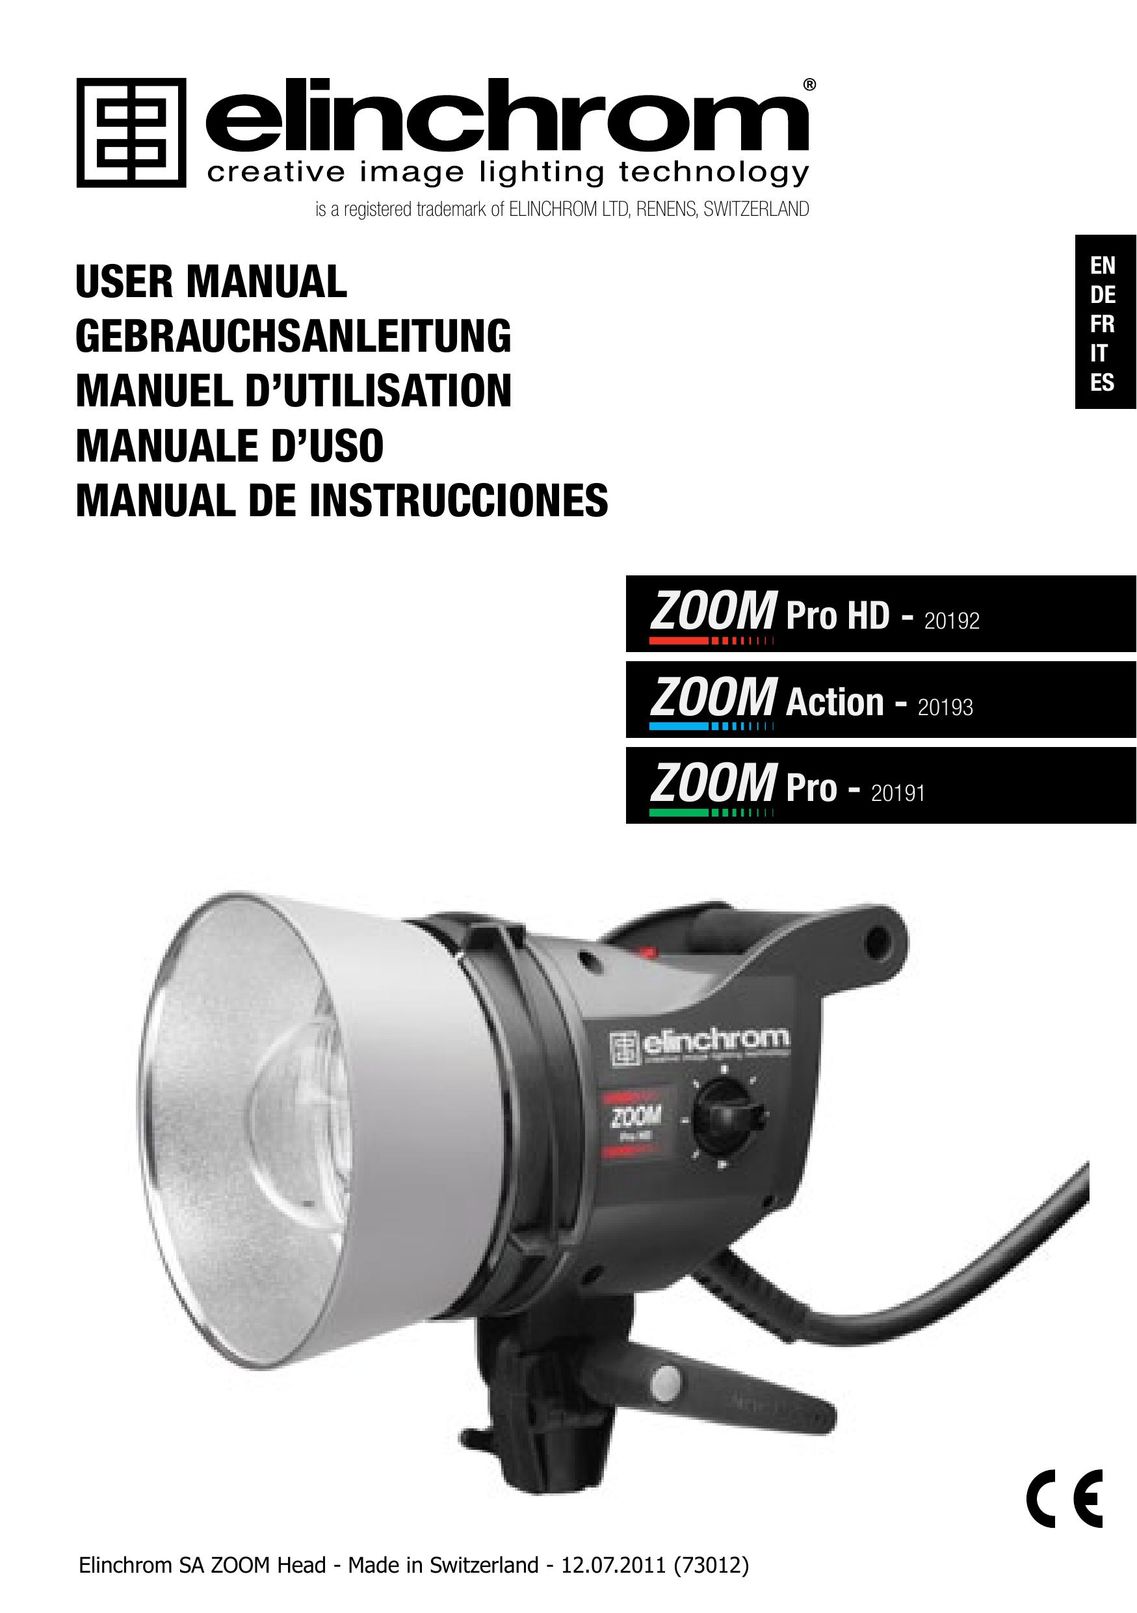 Elinchrom PRO HD - 20192 Home Safety Product User Manual